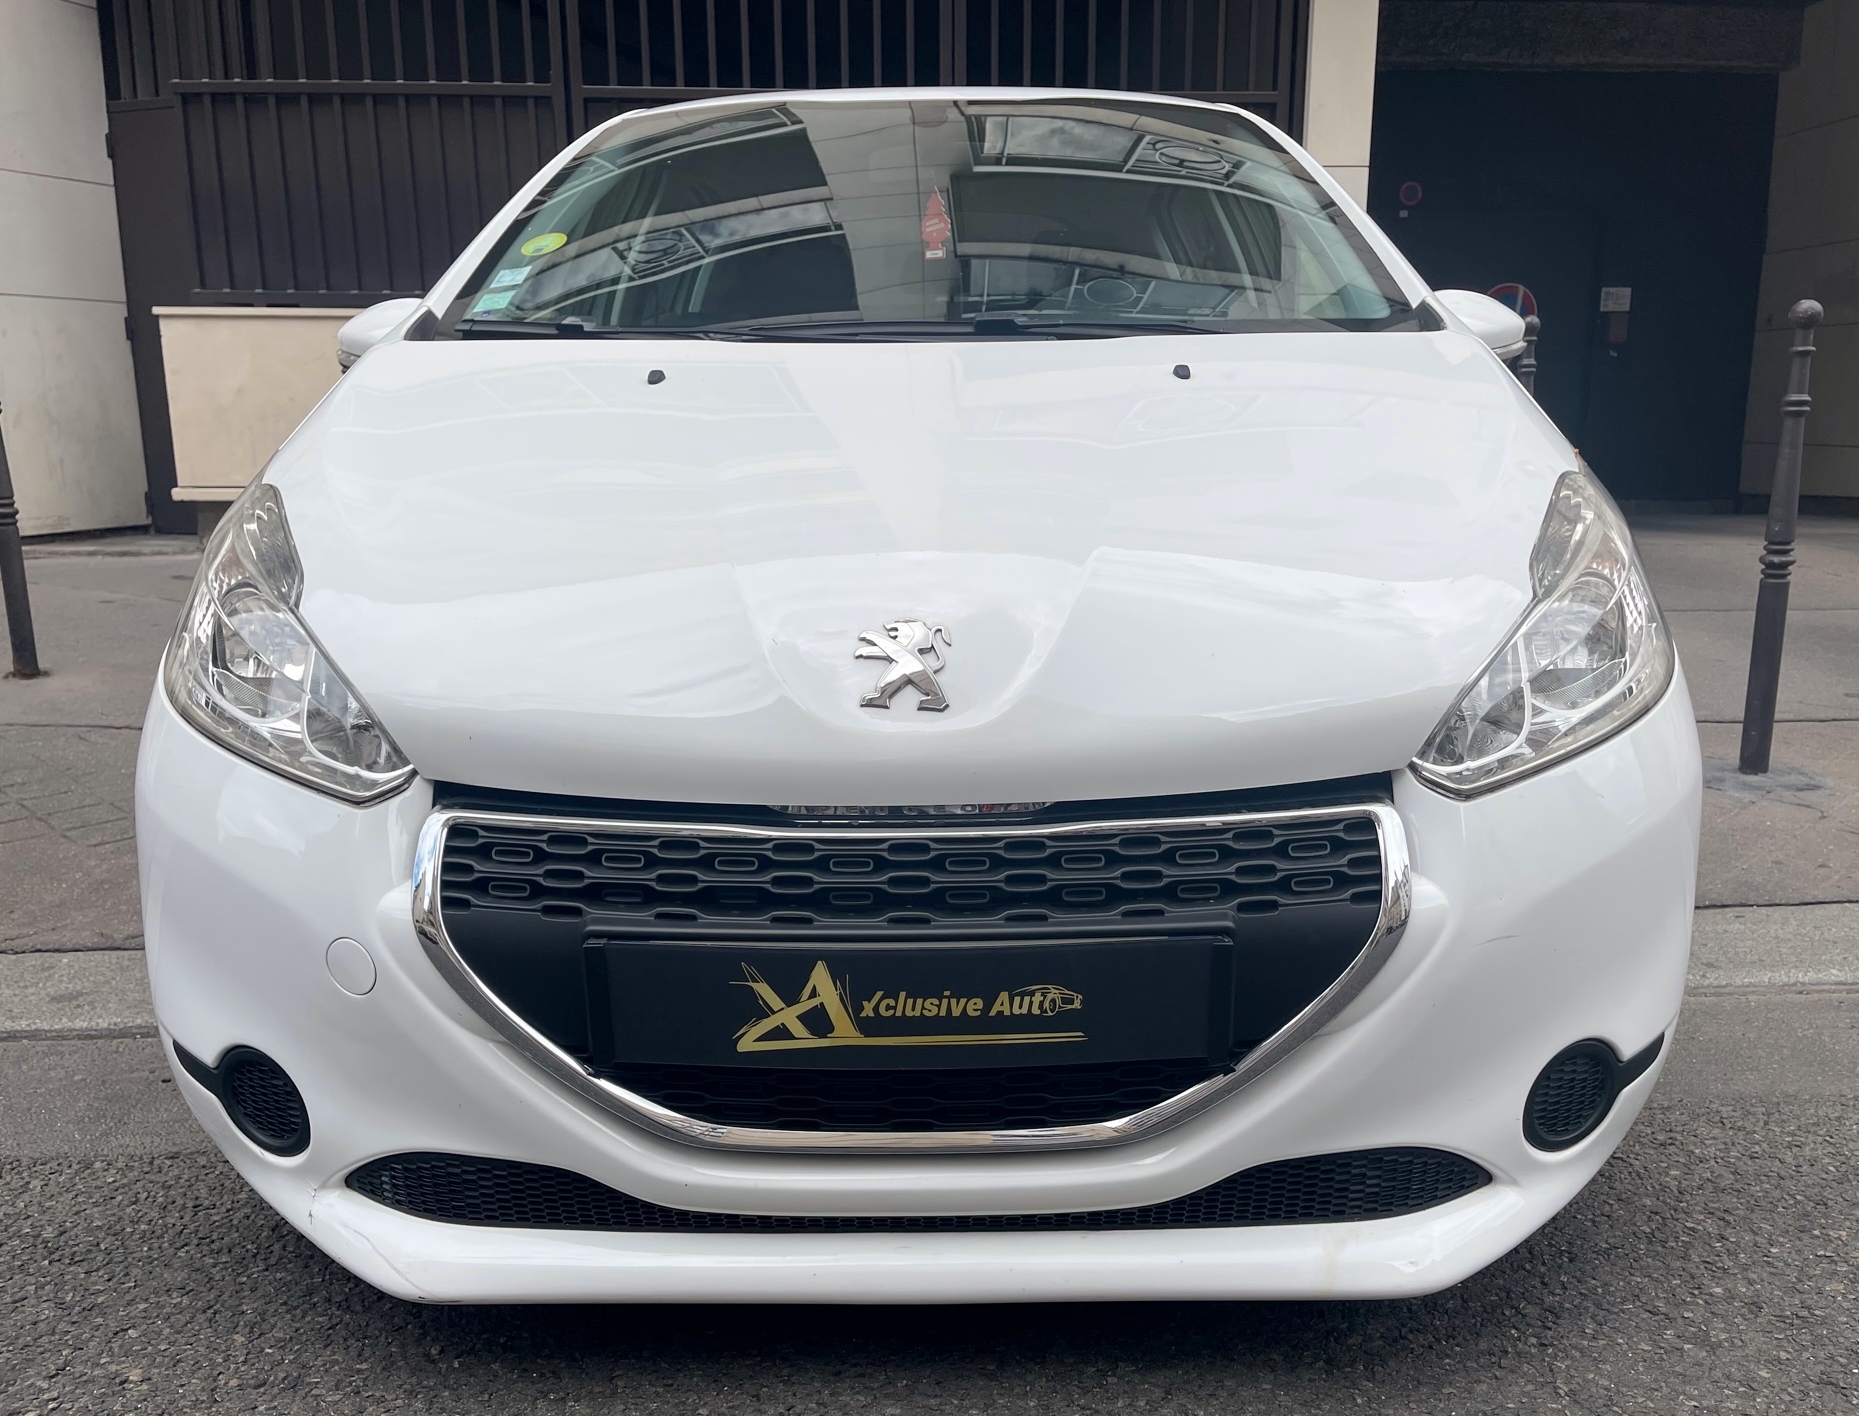 PEUGEOT 208 1.4 HDI 68 ACTIVE 7